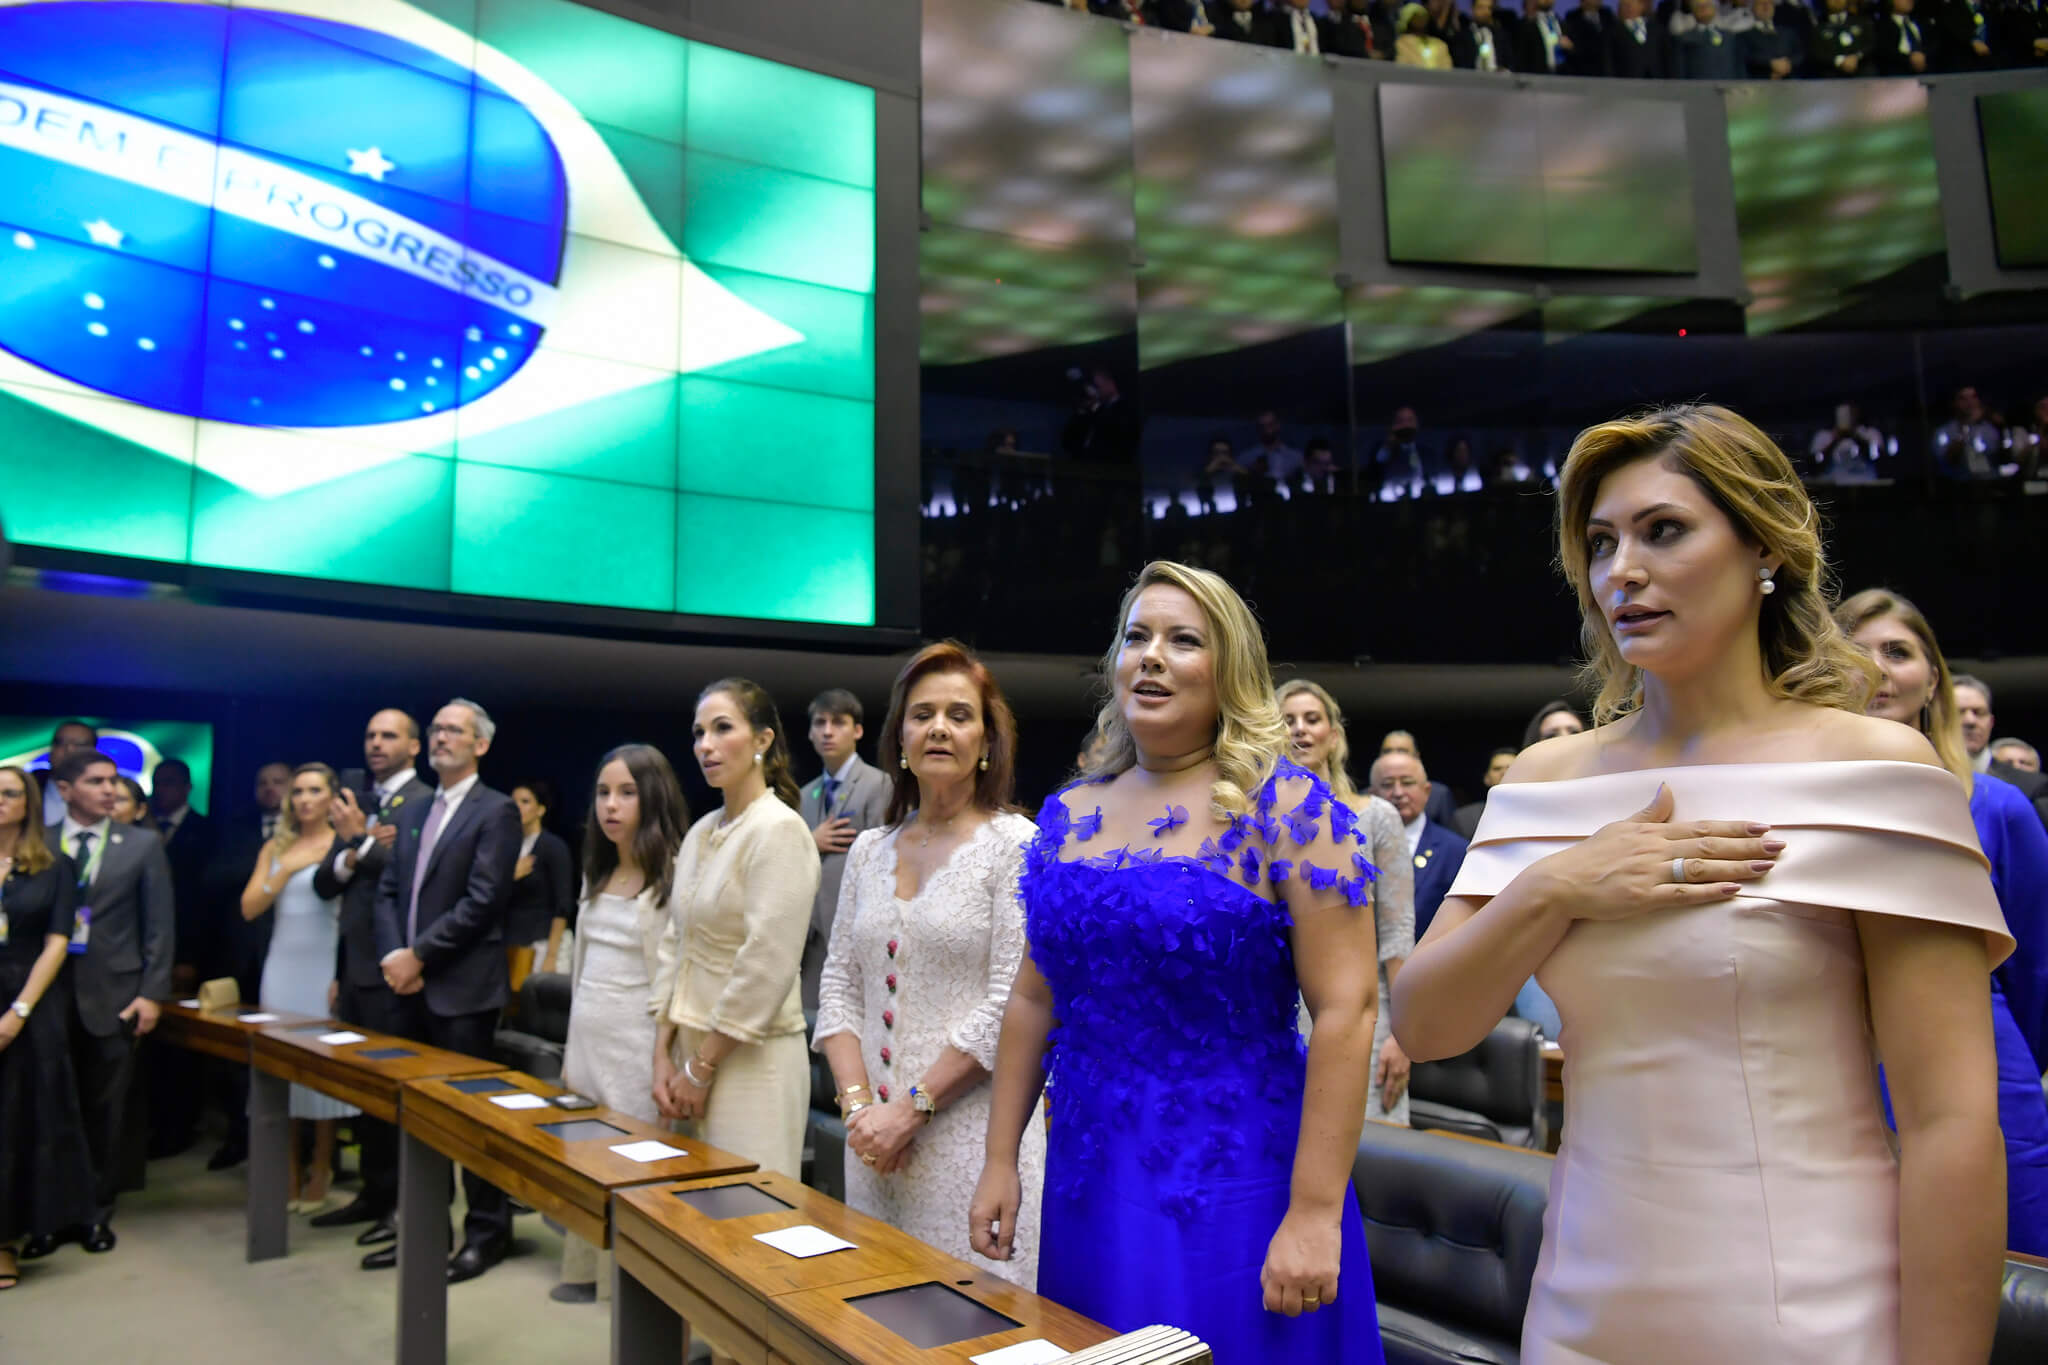 Ceremony in the National Congress during the inauguration of president Bolsonaro with on the right first lady Michelle Bolsonaro - Senado Federal